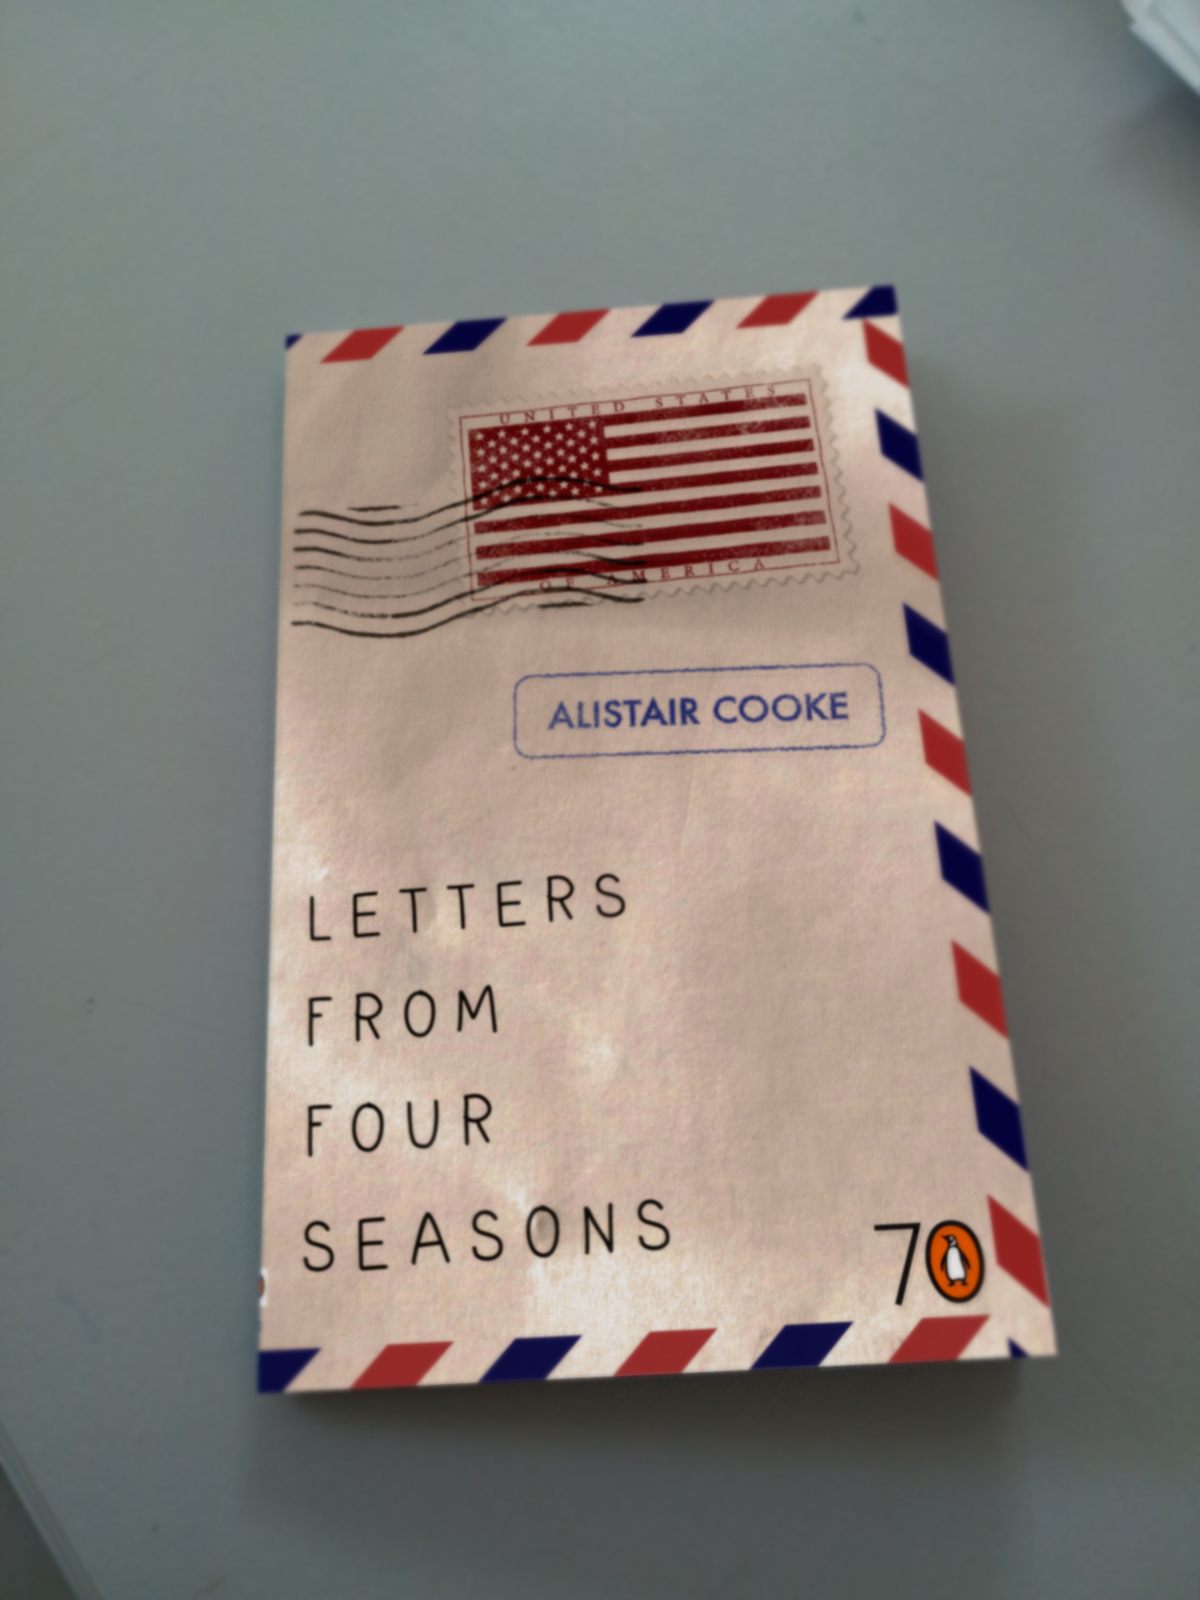 Pocket pengiun penguin books book bookcover cover alistair cooke airmail letter mail